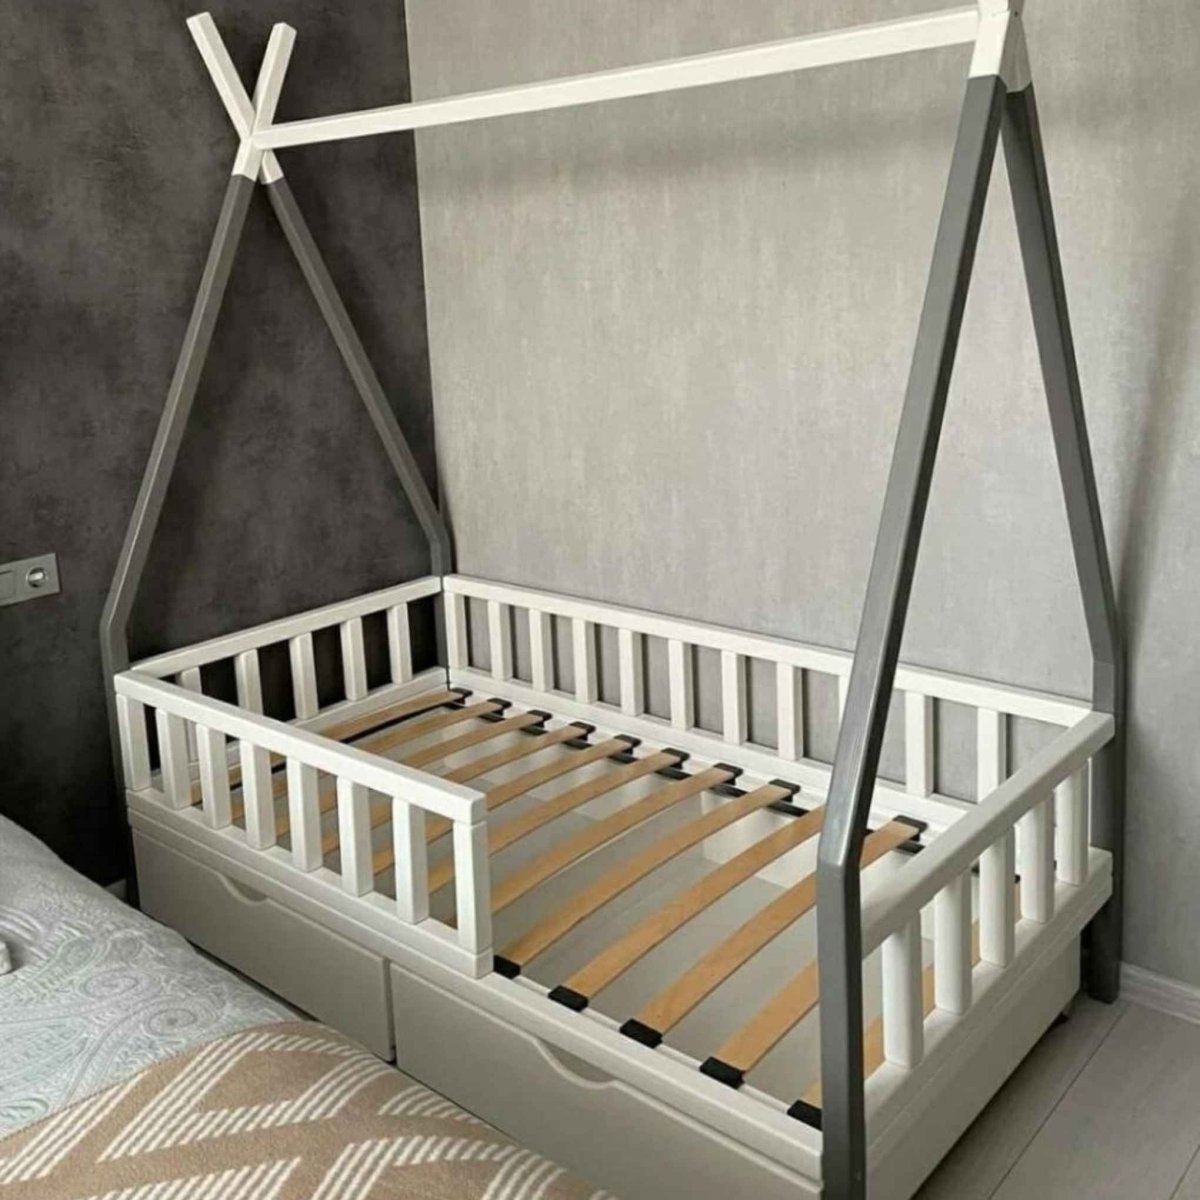 Platform Crib Baby, Toddler and Kids Montessori Floor Bed, full and twin size with rails, natural wood